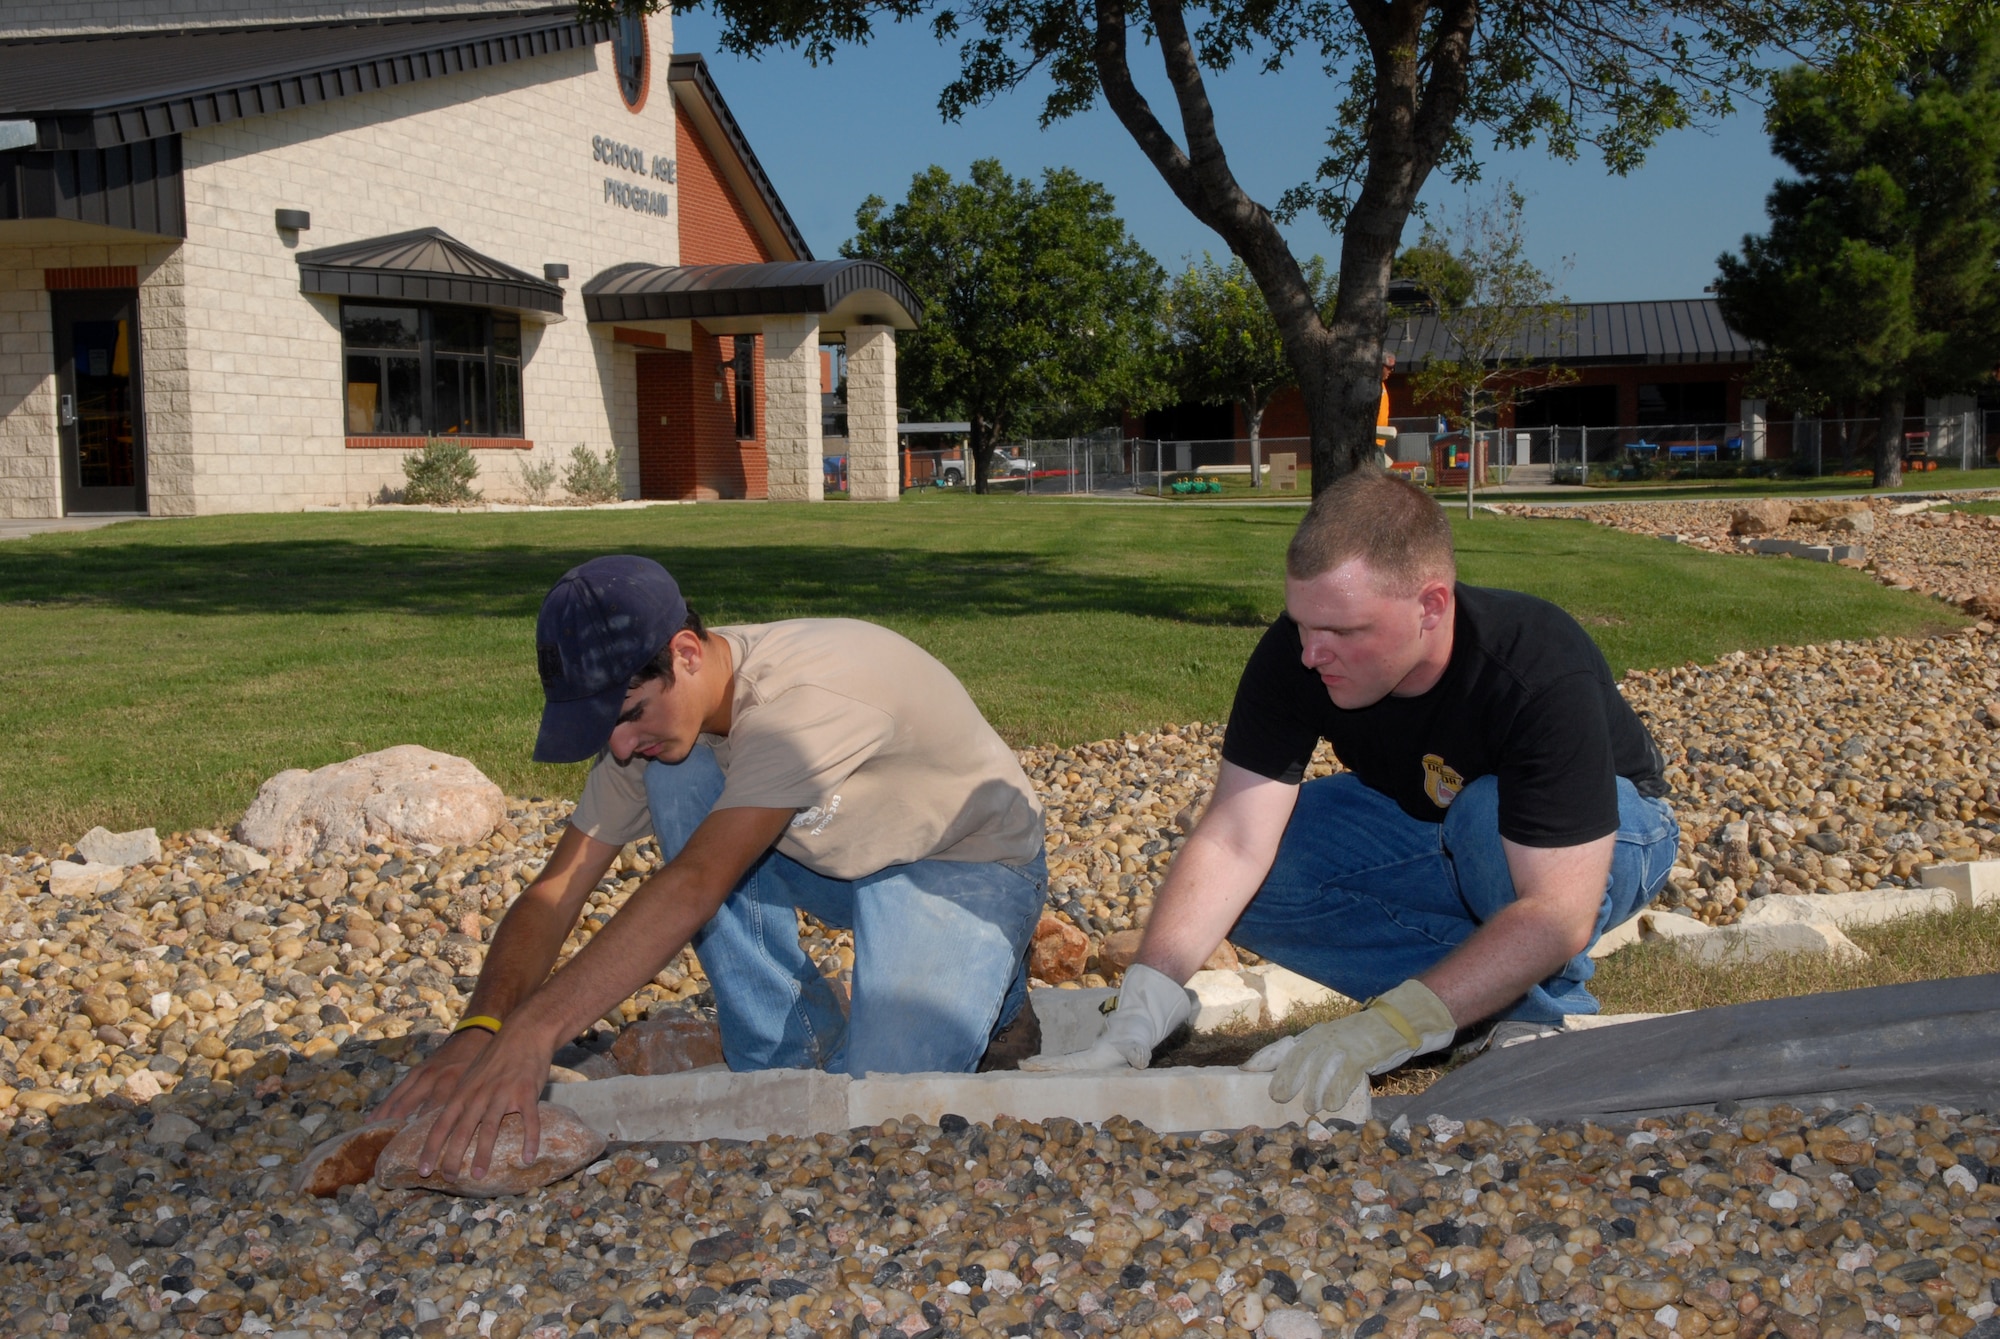 Taylor Cambre, a Boy Scout from Troop 363, and Senior Airman David Le Beau, 17th Civil Engineer Squadron readiness flight, lay border rock for the dry riverbed at the Goodfellow School-Age Facility Sept. 13. Taylor planned and led this undertaking as part of his Eagle Scout service project. Members of the 17 CES volunteered their time to help. (U.S. Air Force photo by Senior Airman Kasabyan Musal)